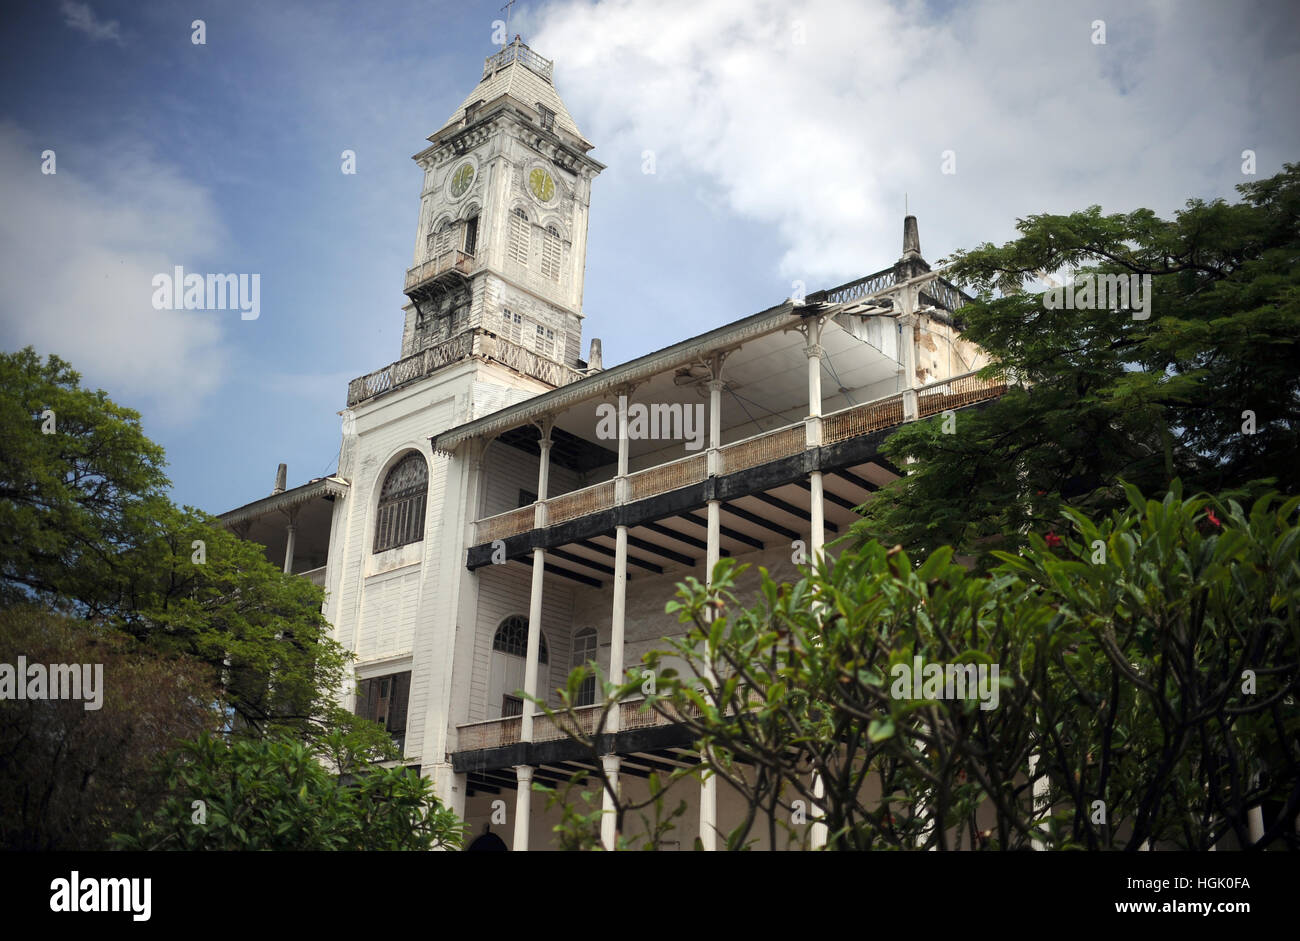 View of the 'House of Wonders - Beit-al-Ajaib' in Stone Town on Zanzibar island, Tanzania, 6 March 2016. The house of wonders was built in 1883 and was the first building with an elevator in East Africa. Since 2000, the building is listed as a UNESCO World Heritage. Photo: Britta Pedersen/dpa-Zentralbild/ZB Stock Photo